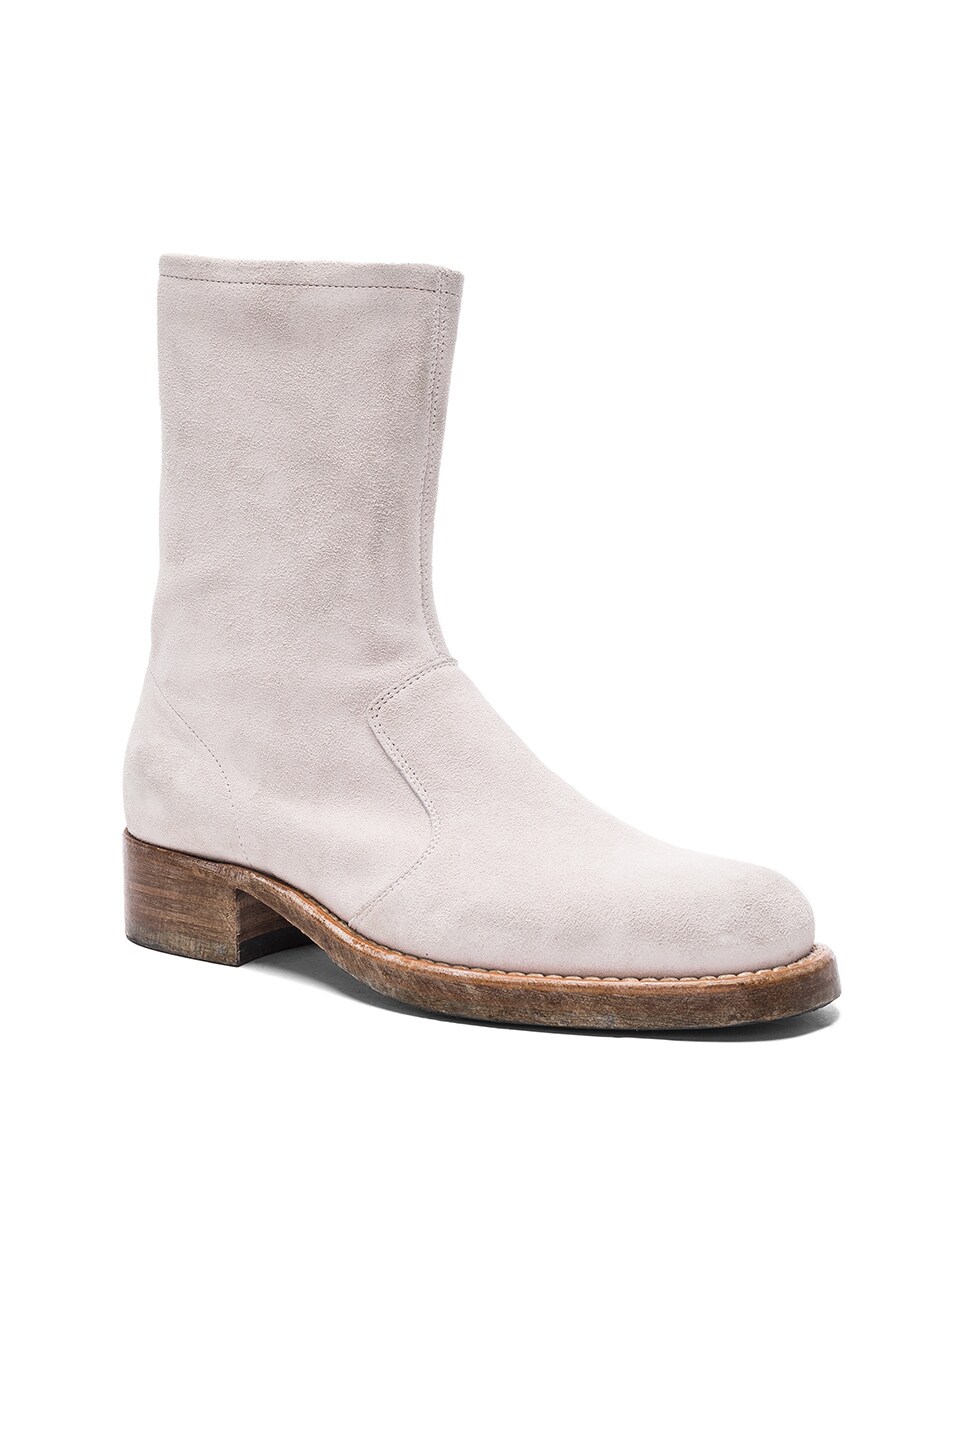 Image 1 of Maison Margiela Vintage Treatment Suede Boots in Off White